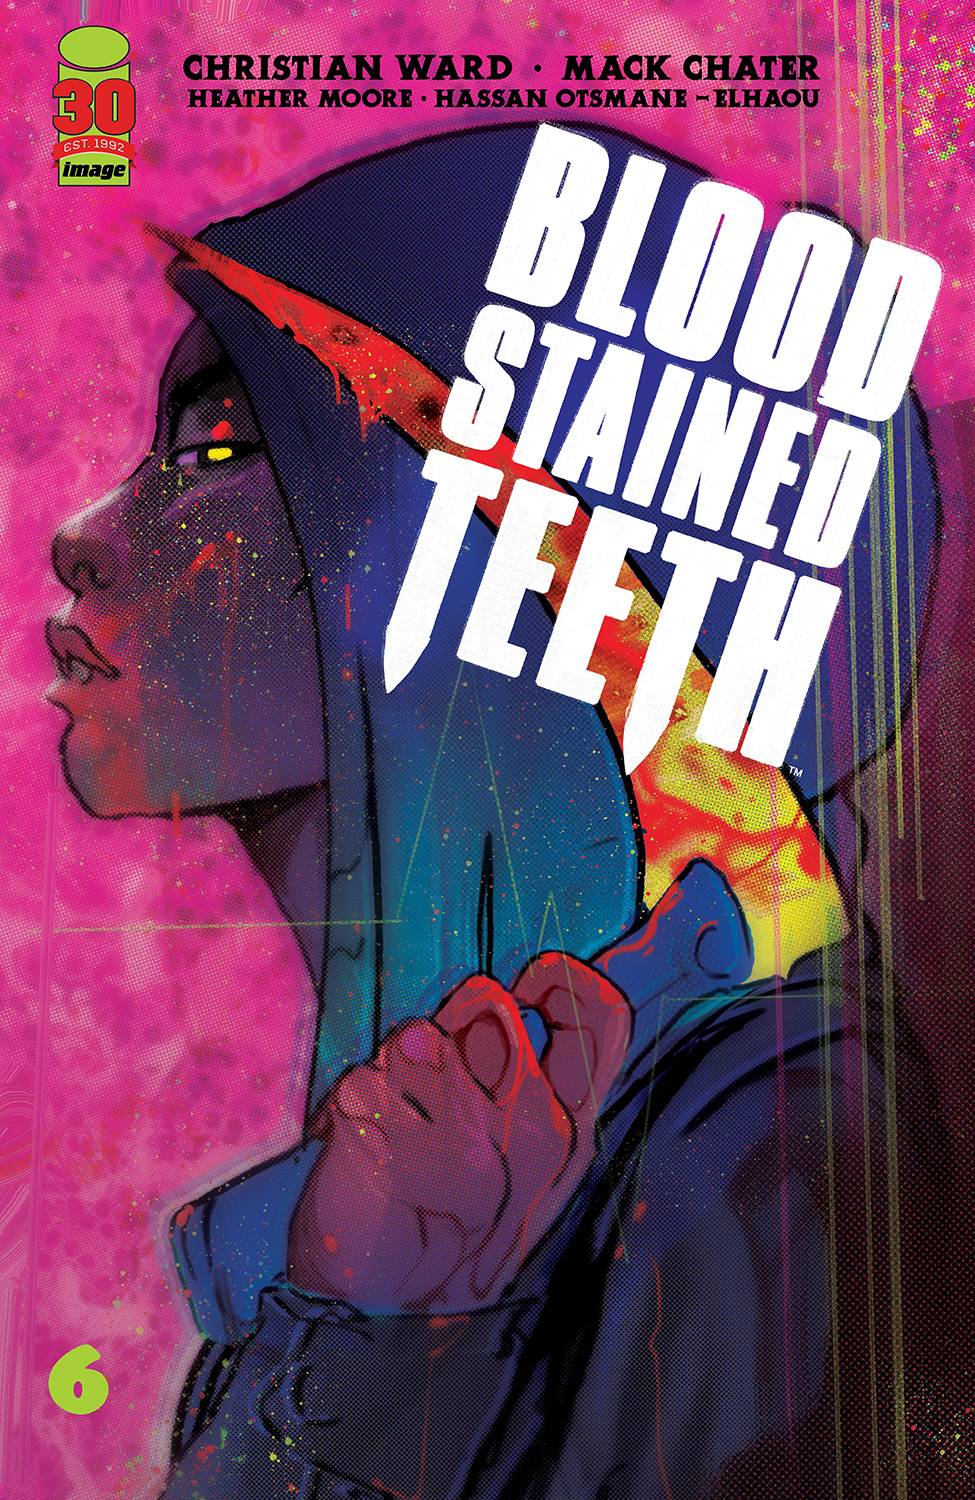 Blood Stained Teeth #6 Cvr A Ward (MR) - State of Comics